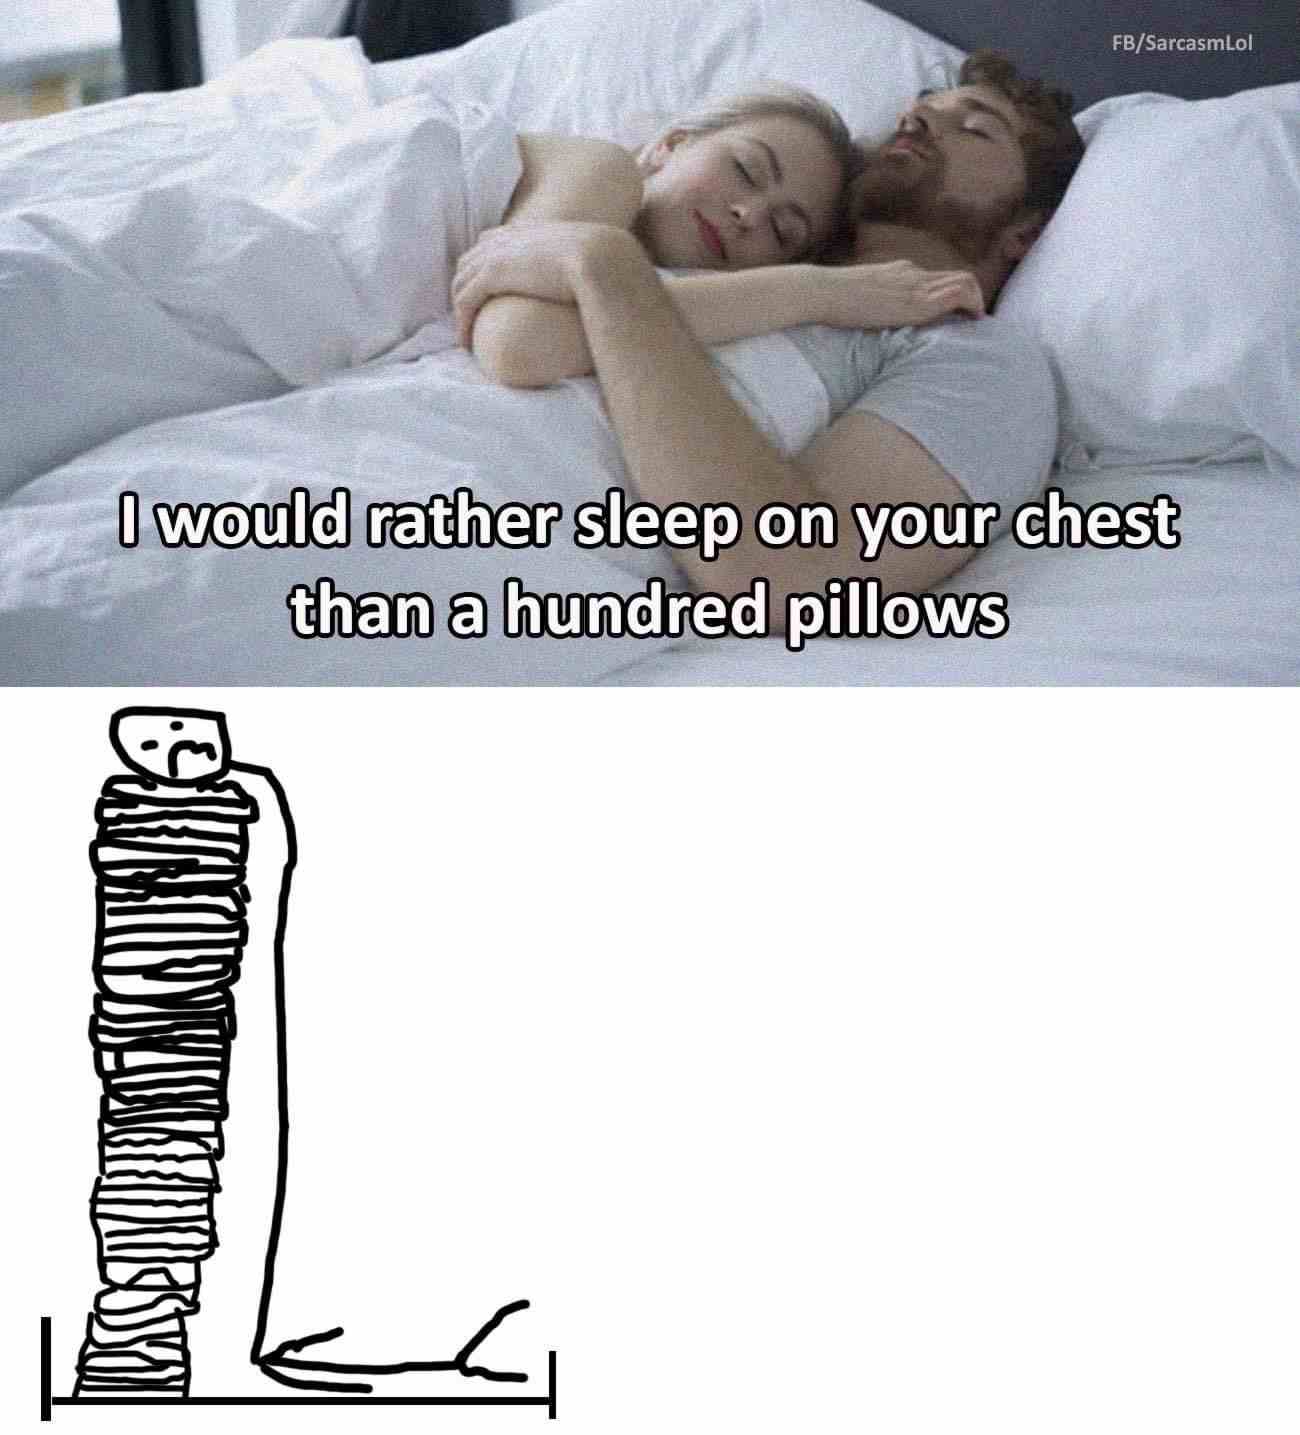 I would rather sleep on your chest than a hundred pillows